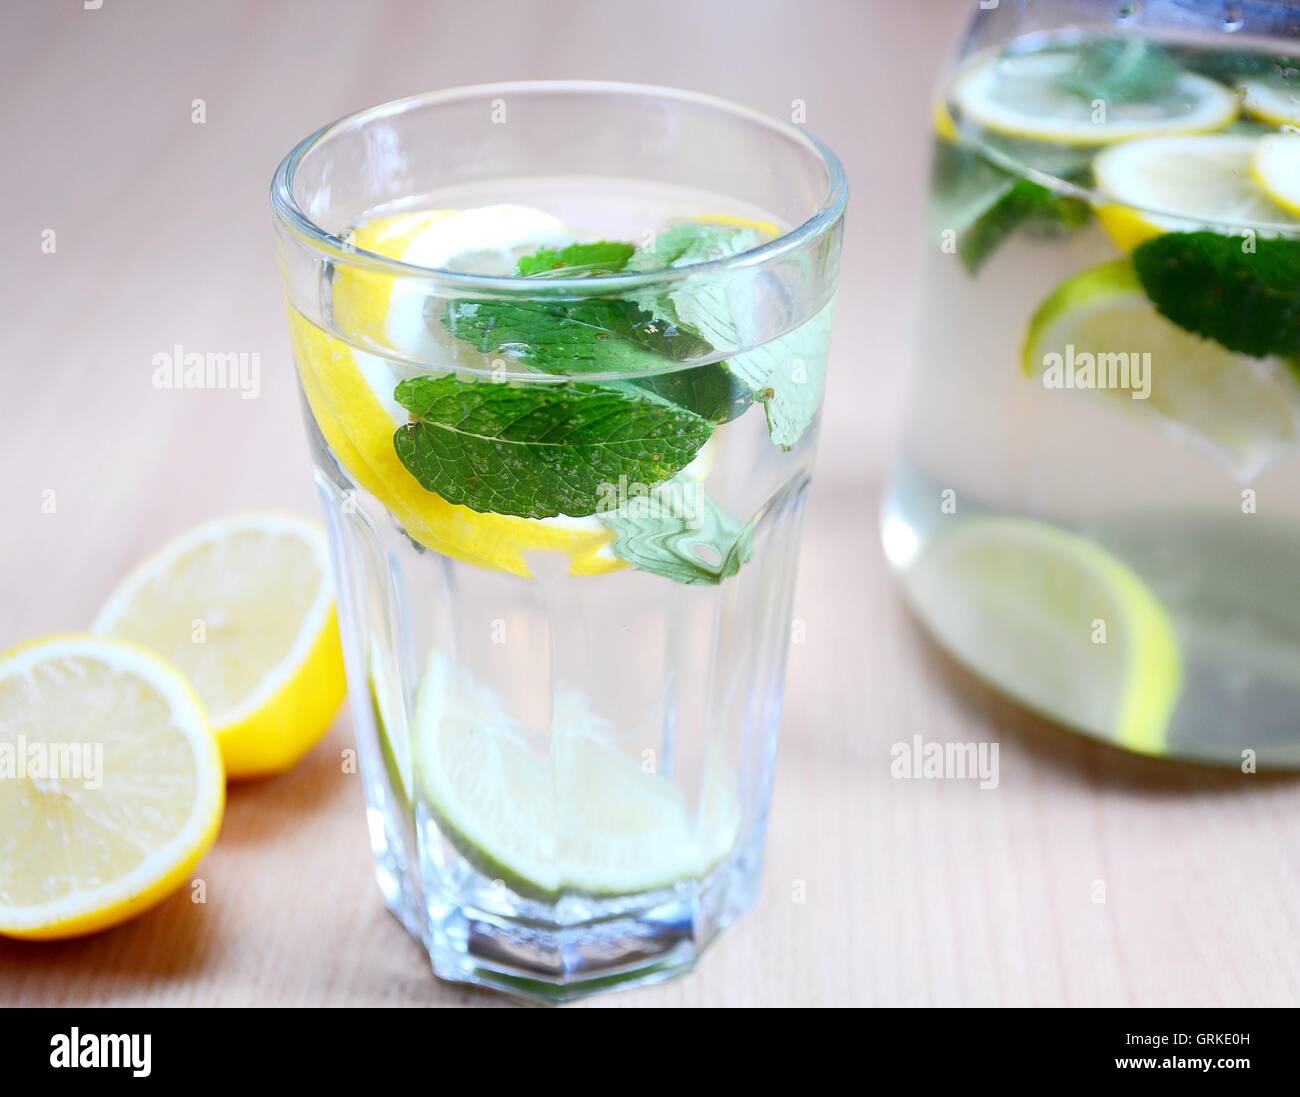 Fresh non-alcoholic drink with water, mint leaves, peaces of lemons and limes in glass. Stock Photo